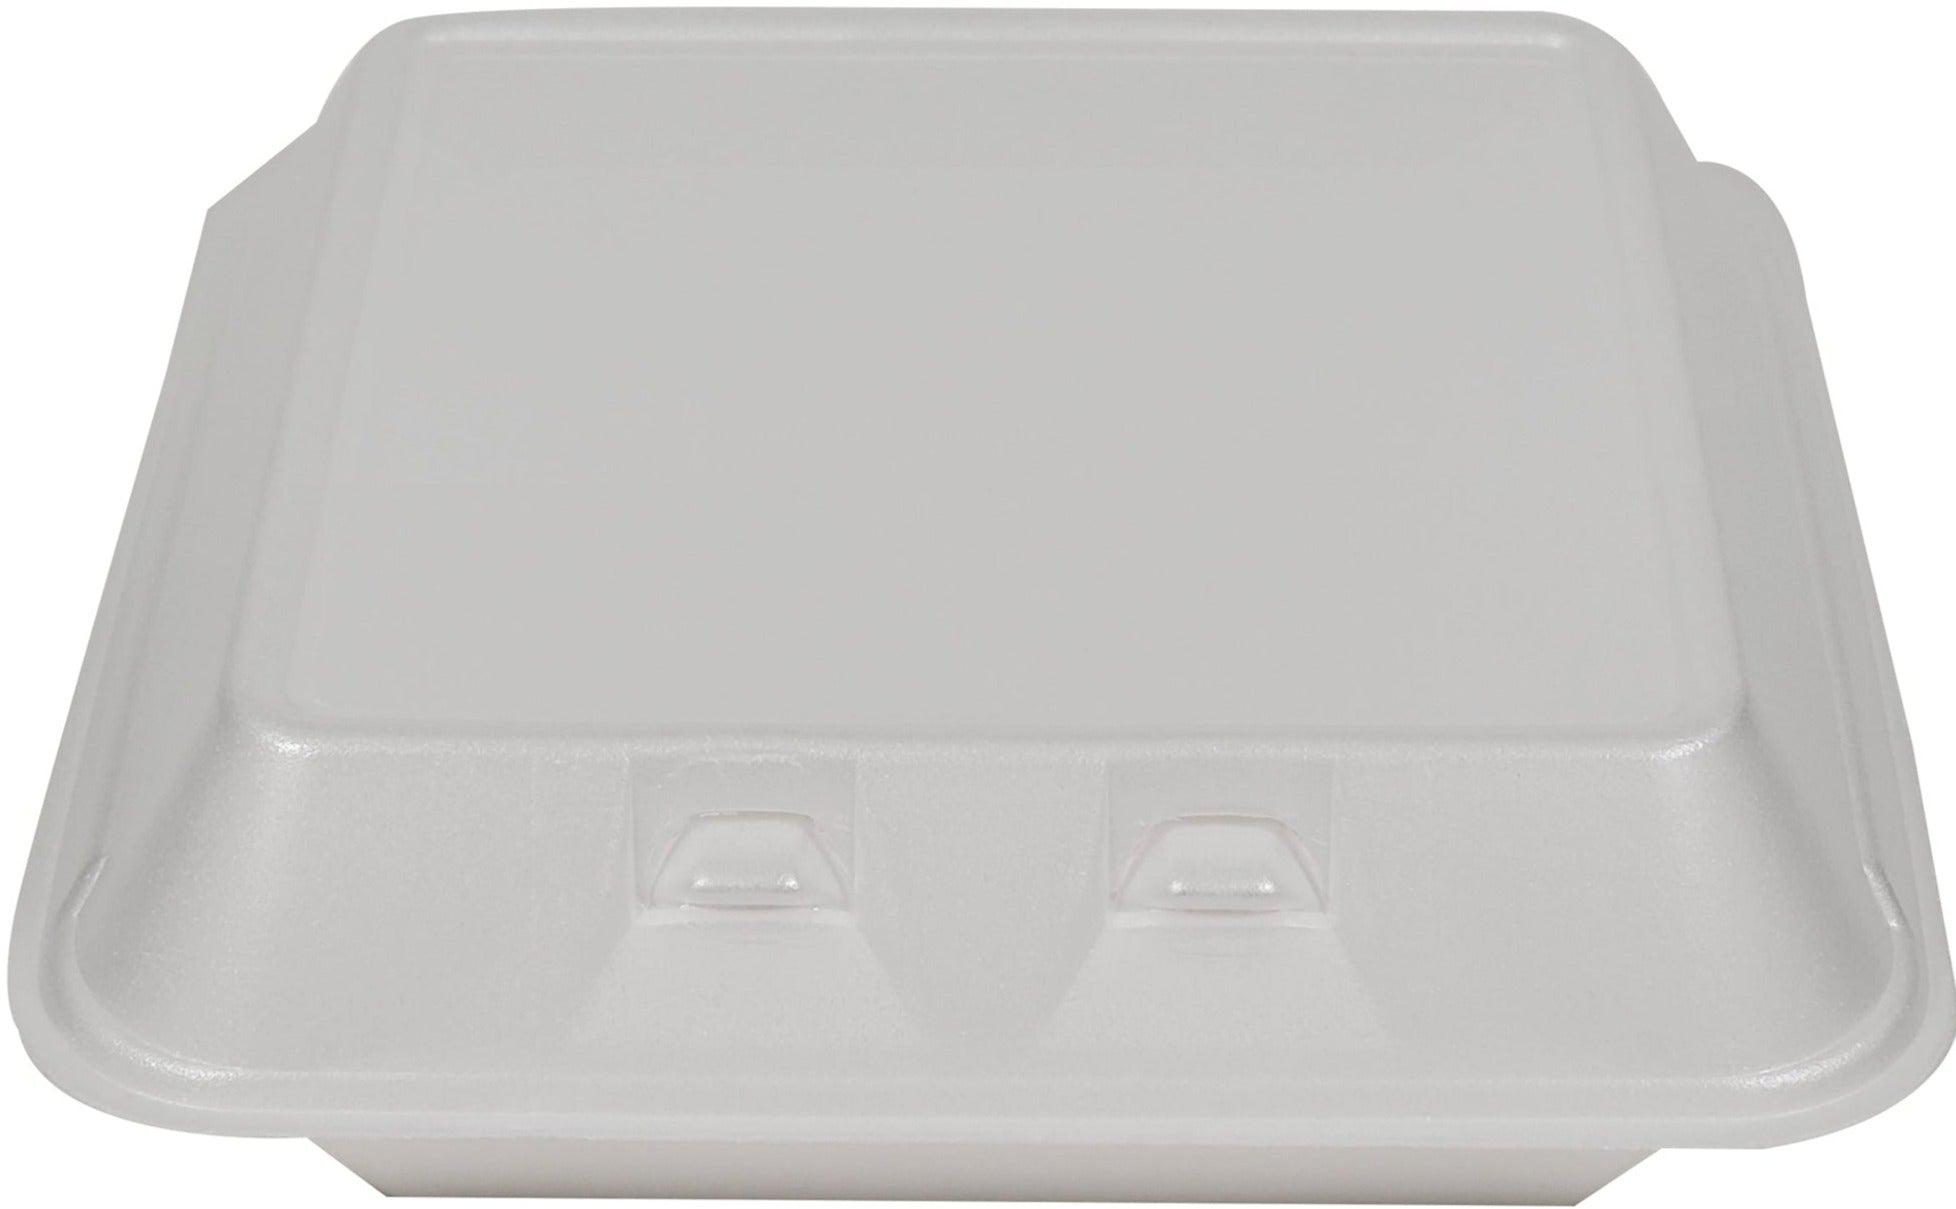 Prices Drop As You Shop Dart Foam Container, 8W x 8L, White, 200 ct,  styrofoam to go containers